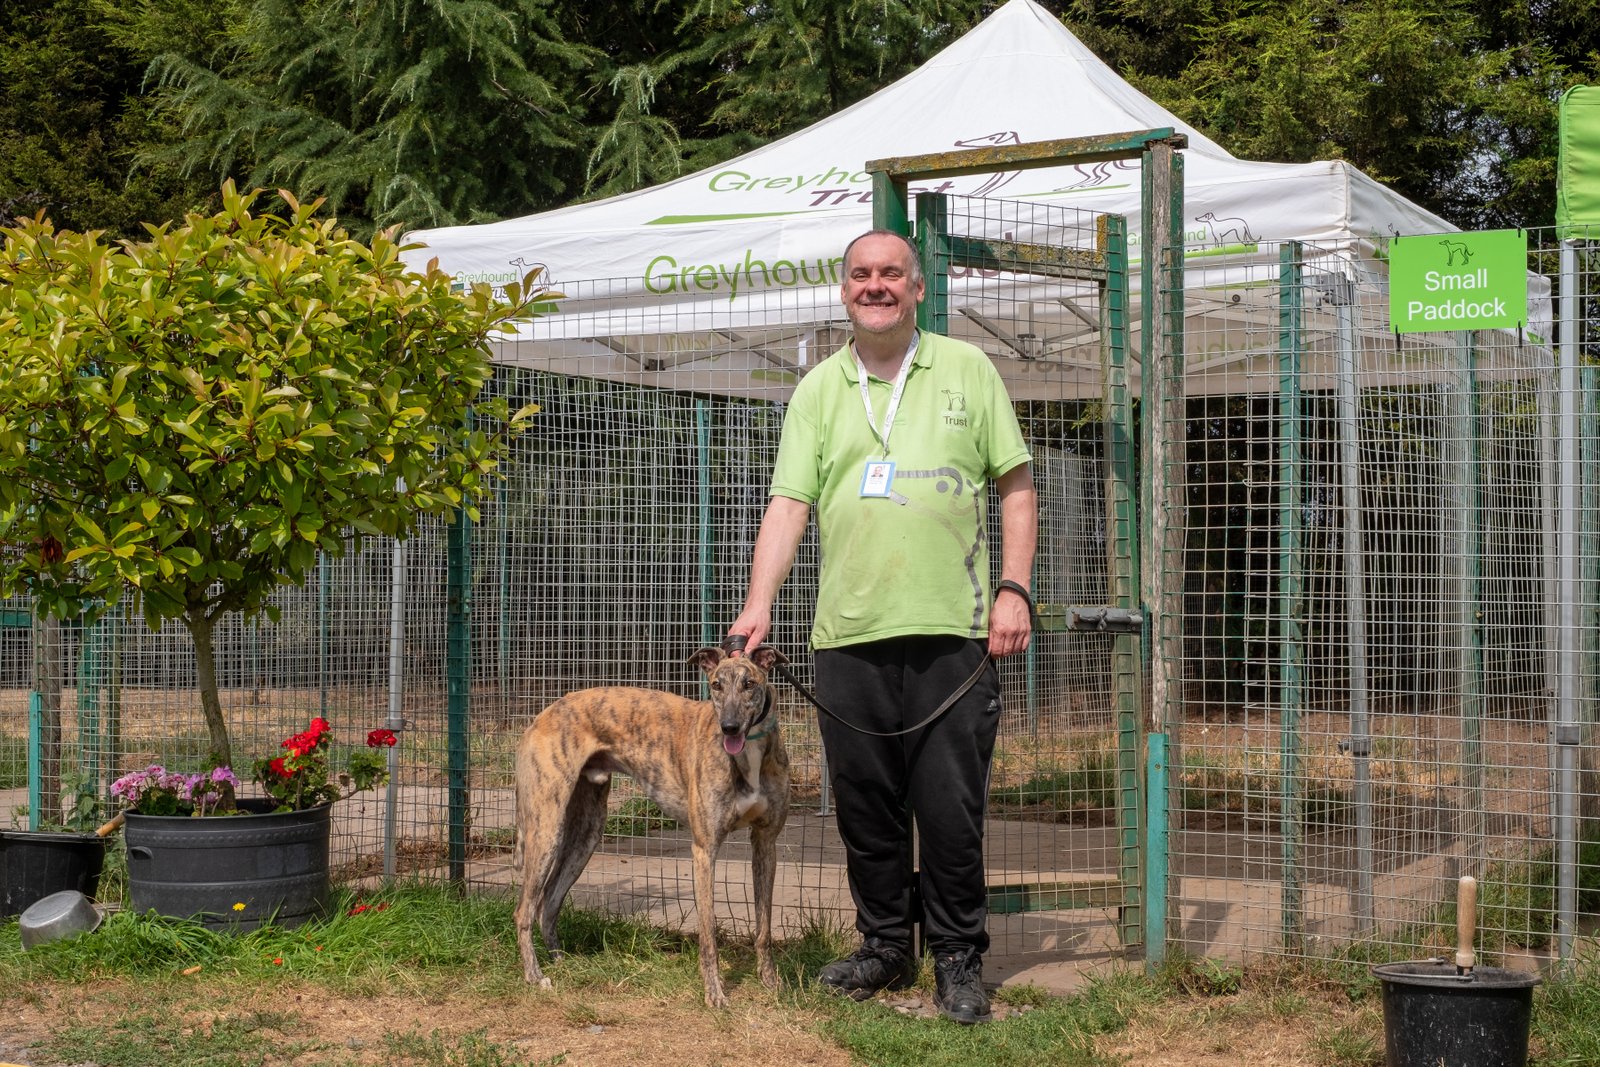 A middle-aged white man wearing a Greyhound Trust pale green shirt and dark trousers smiles broadly while standing with a greyhound on a leash.